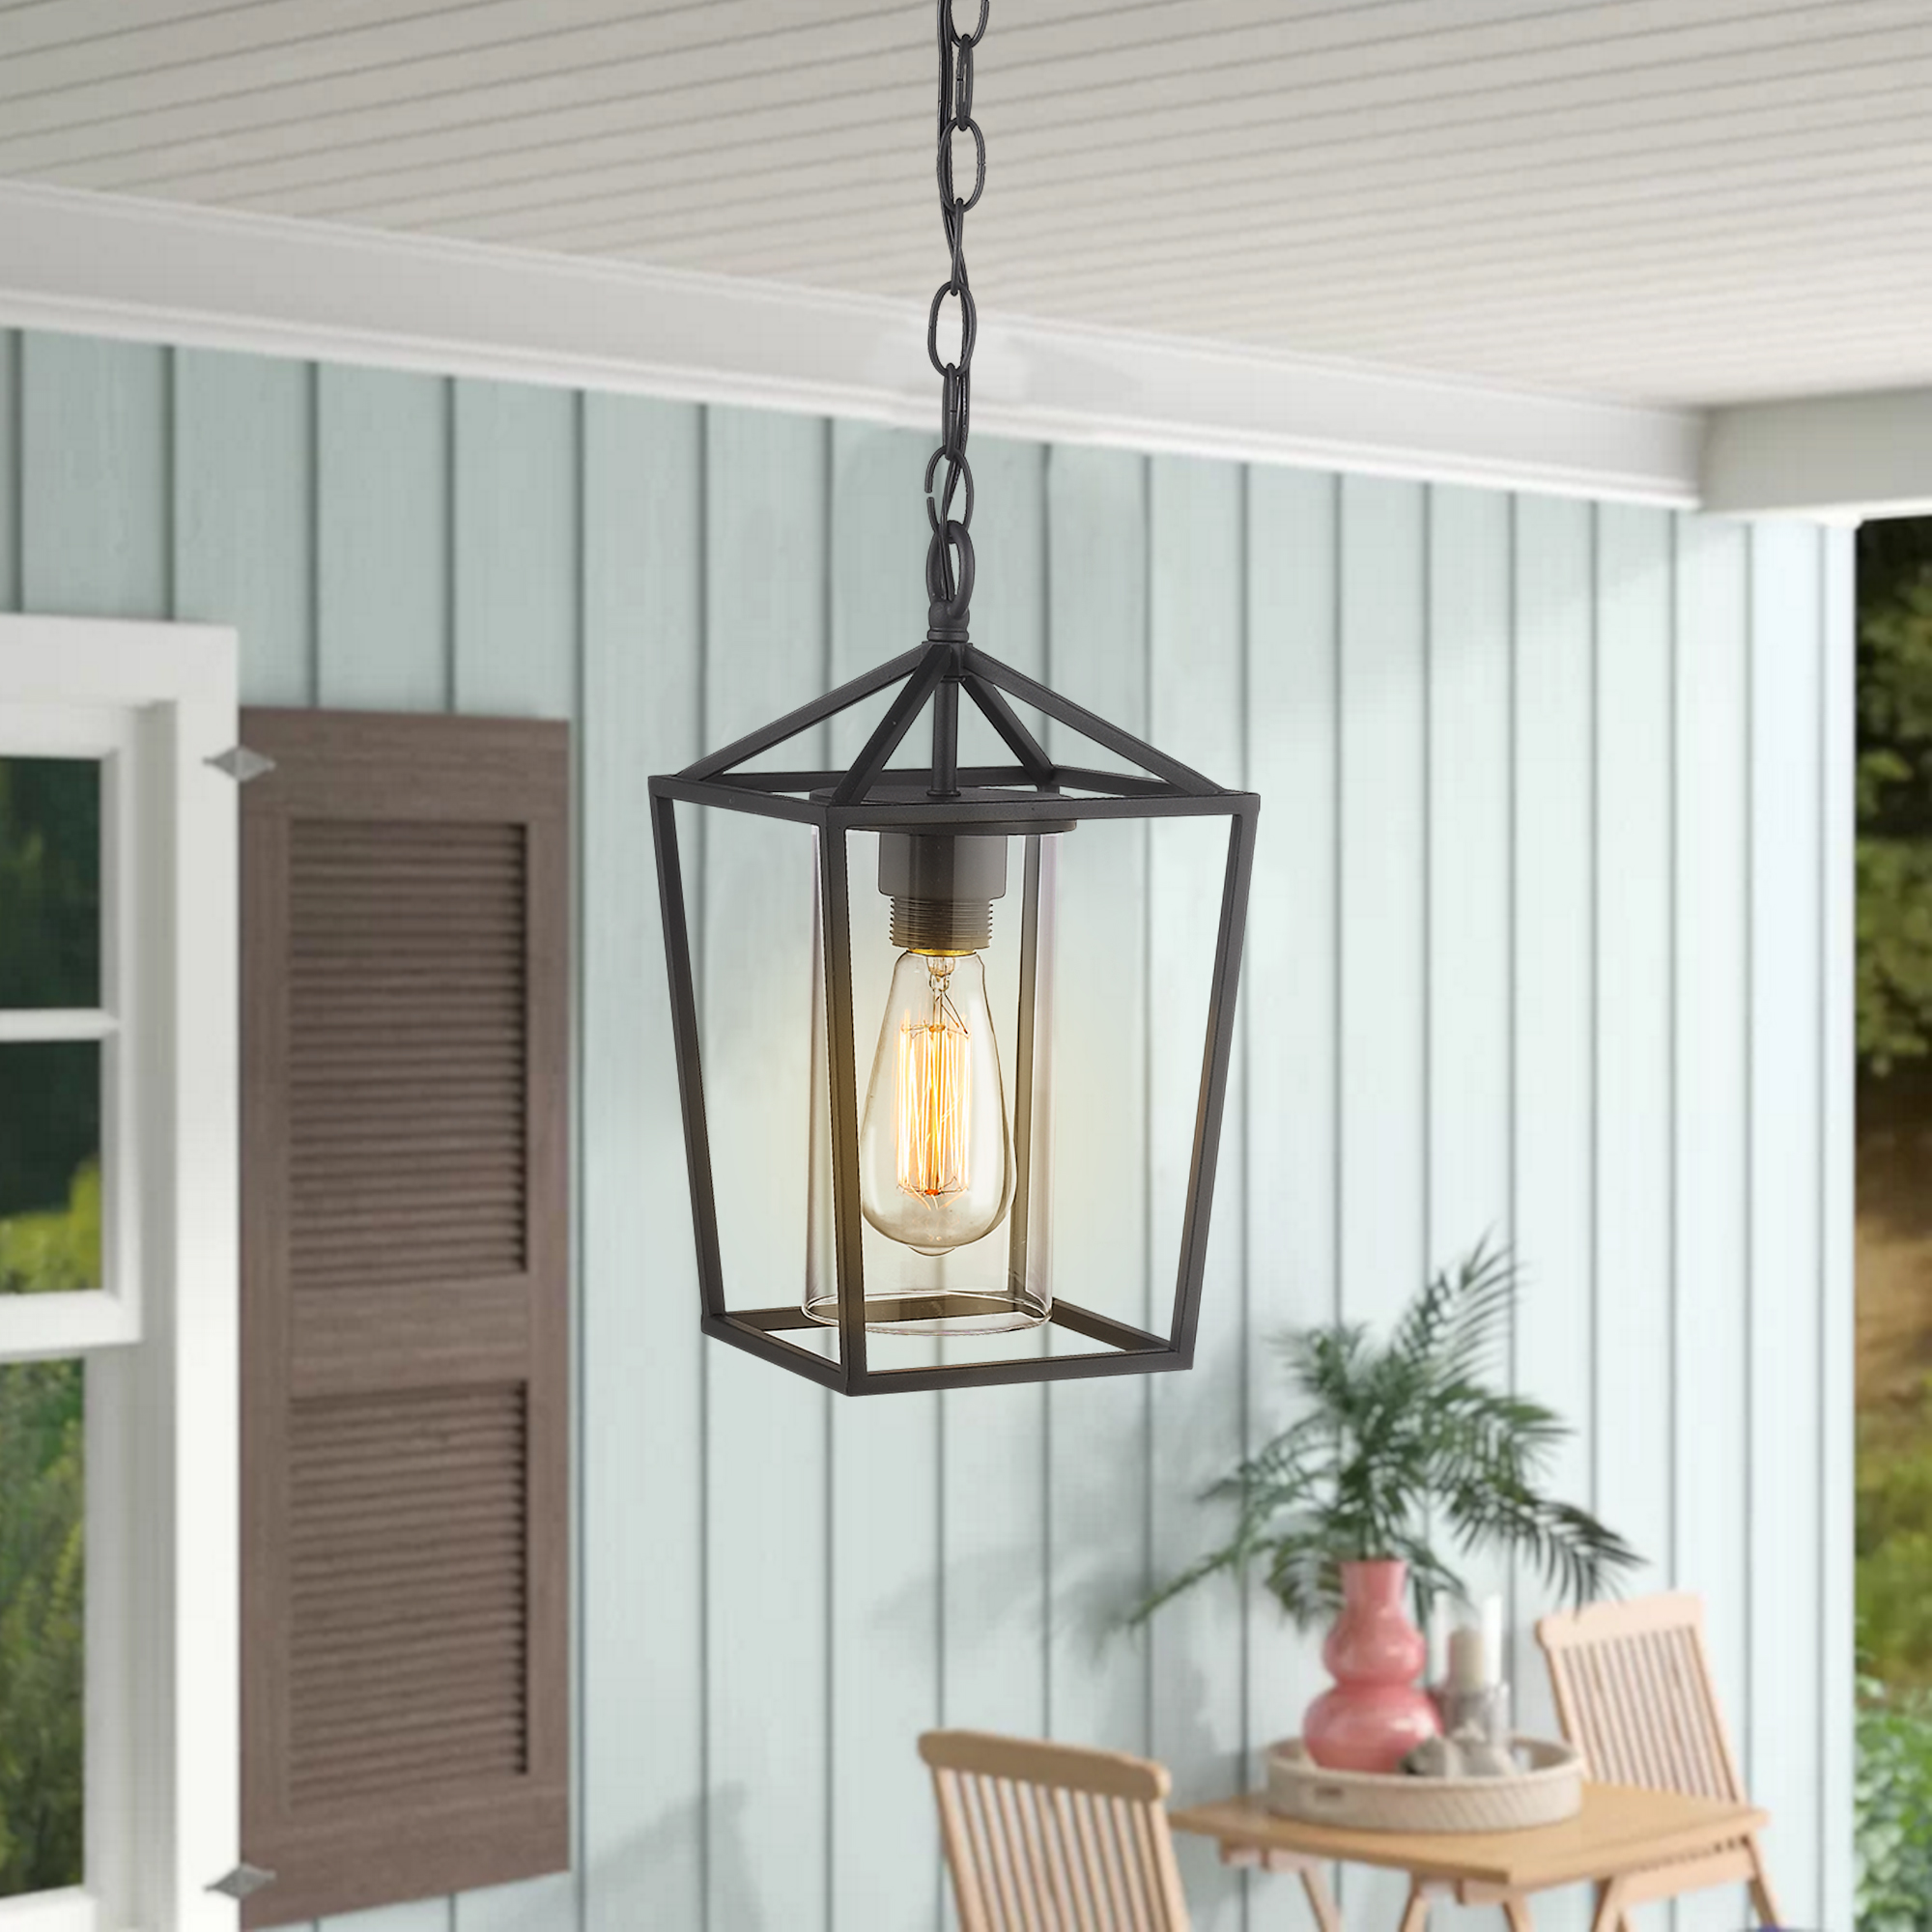 Black Modern Outdoor Pendant Light Caged 1-Light Outdoor Hanging Lantern Light Balck Finish with Cylinder Clear Glass Outdoor Weather Resistant Pendant Light for Wet Location - image 5 of 10